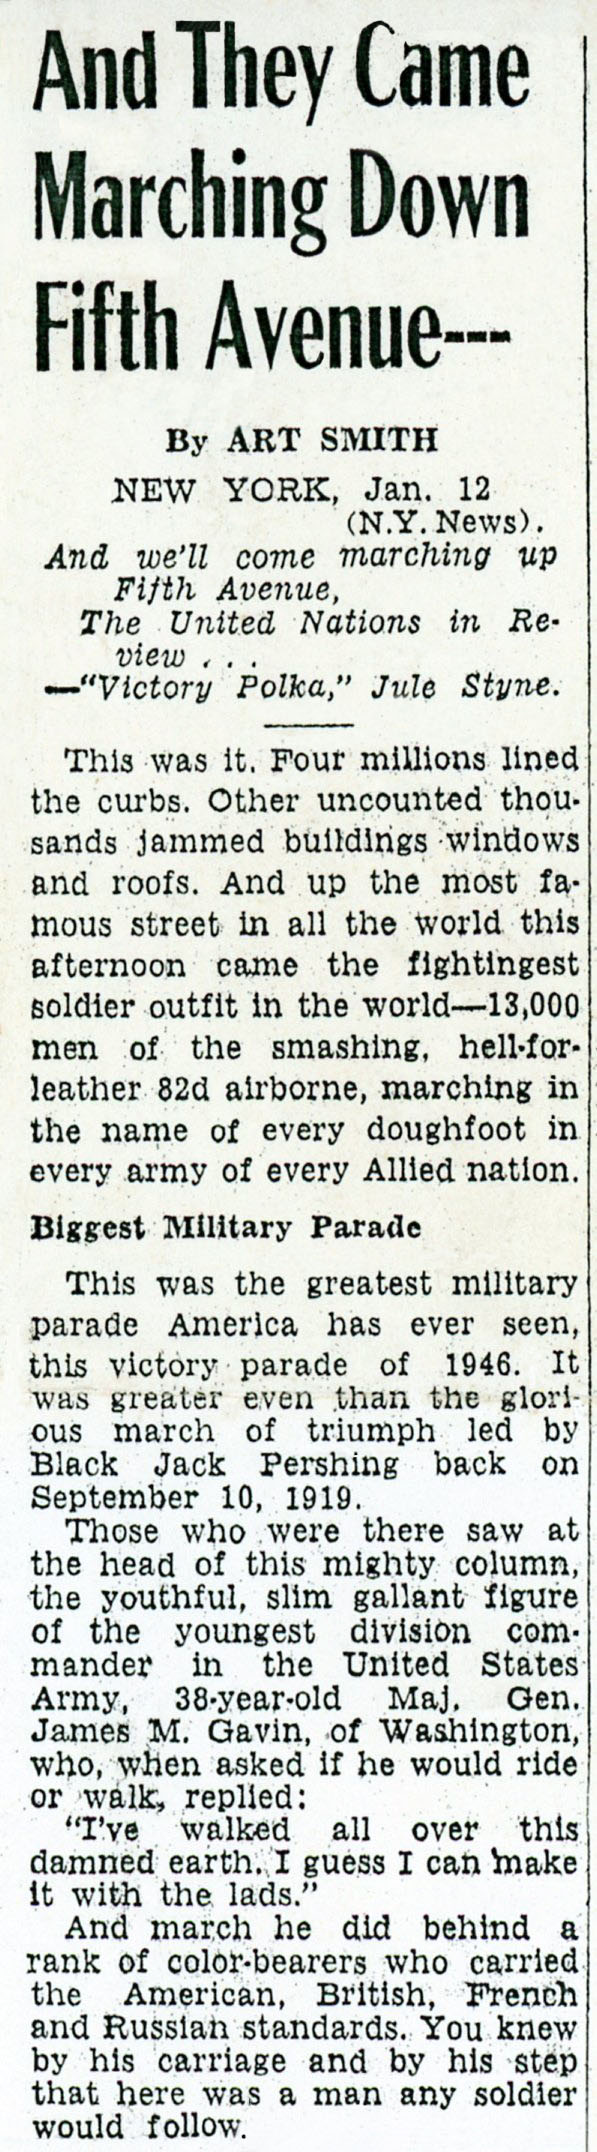 1946 New York News Victory Parade Article-Part 1